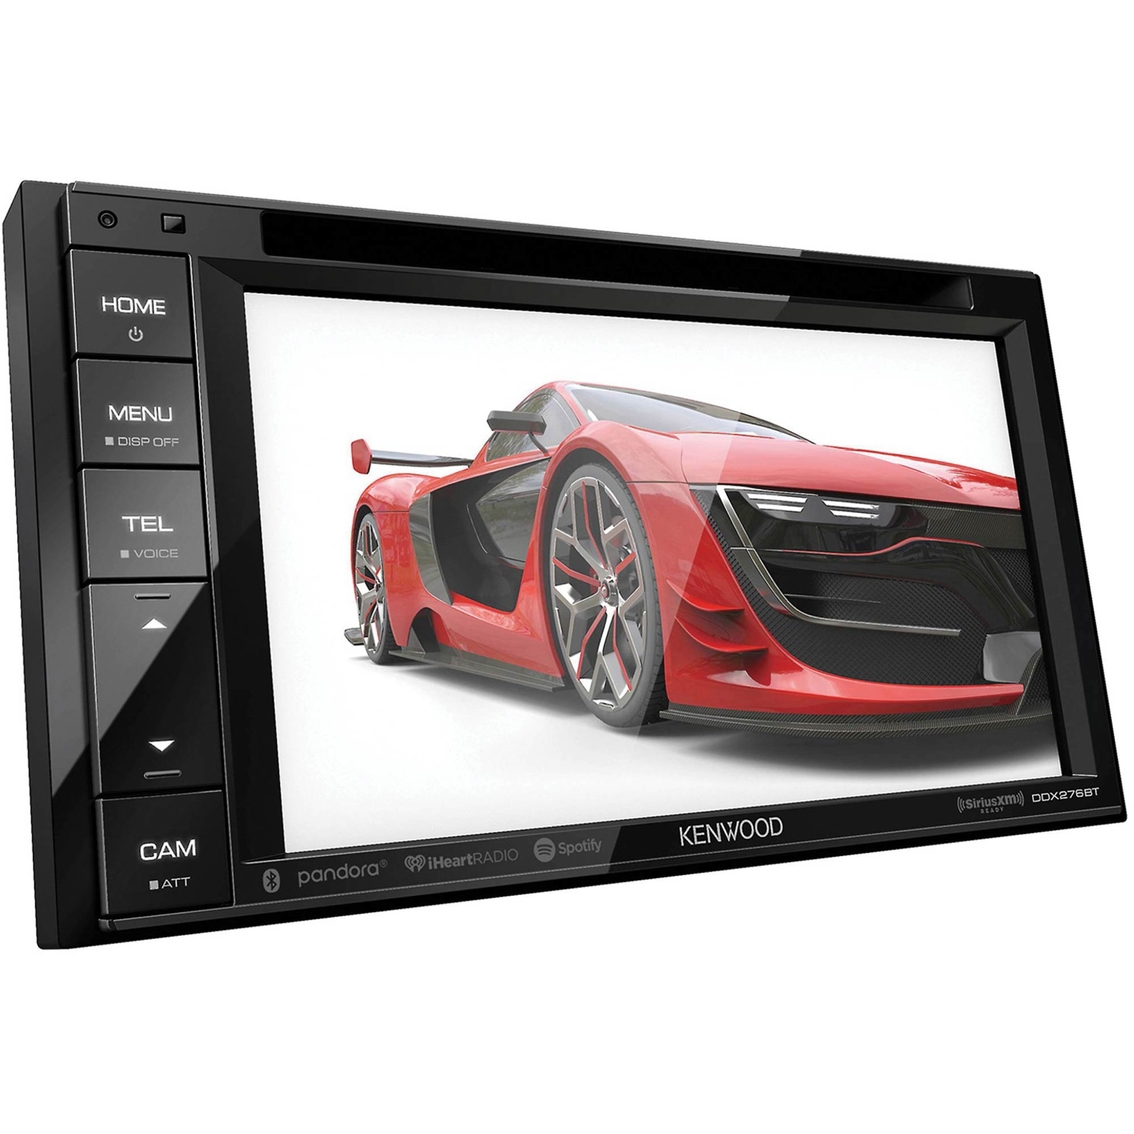 Kenwood 6.2 in. Double-DIN In-Dash DVD Receiver with Bluetooth & SiriusXM Ready - Image 3 of 7